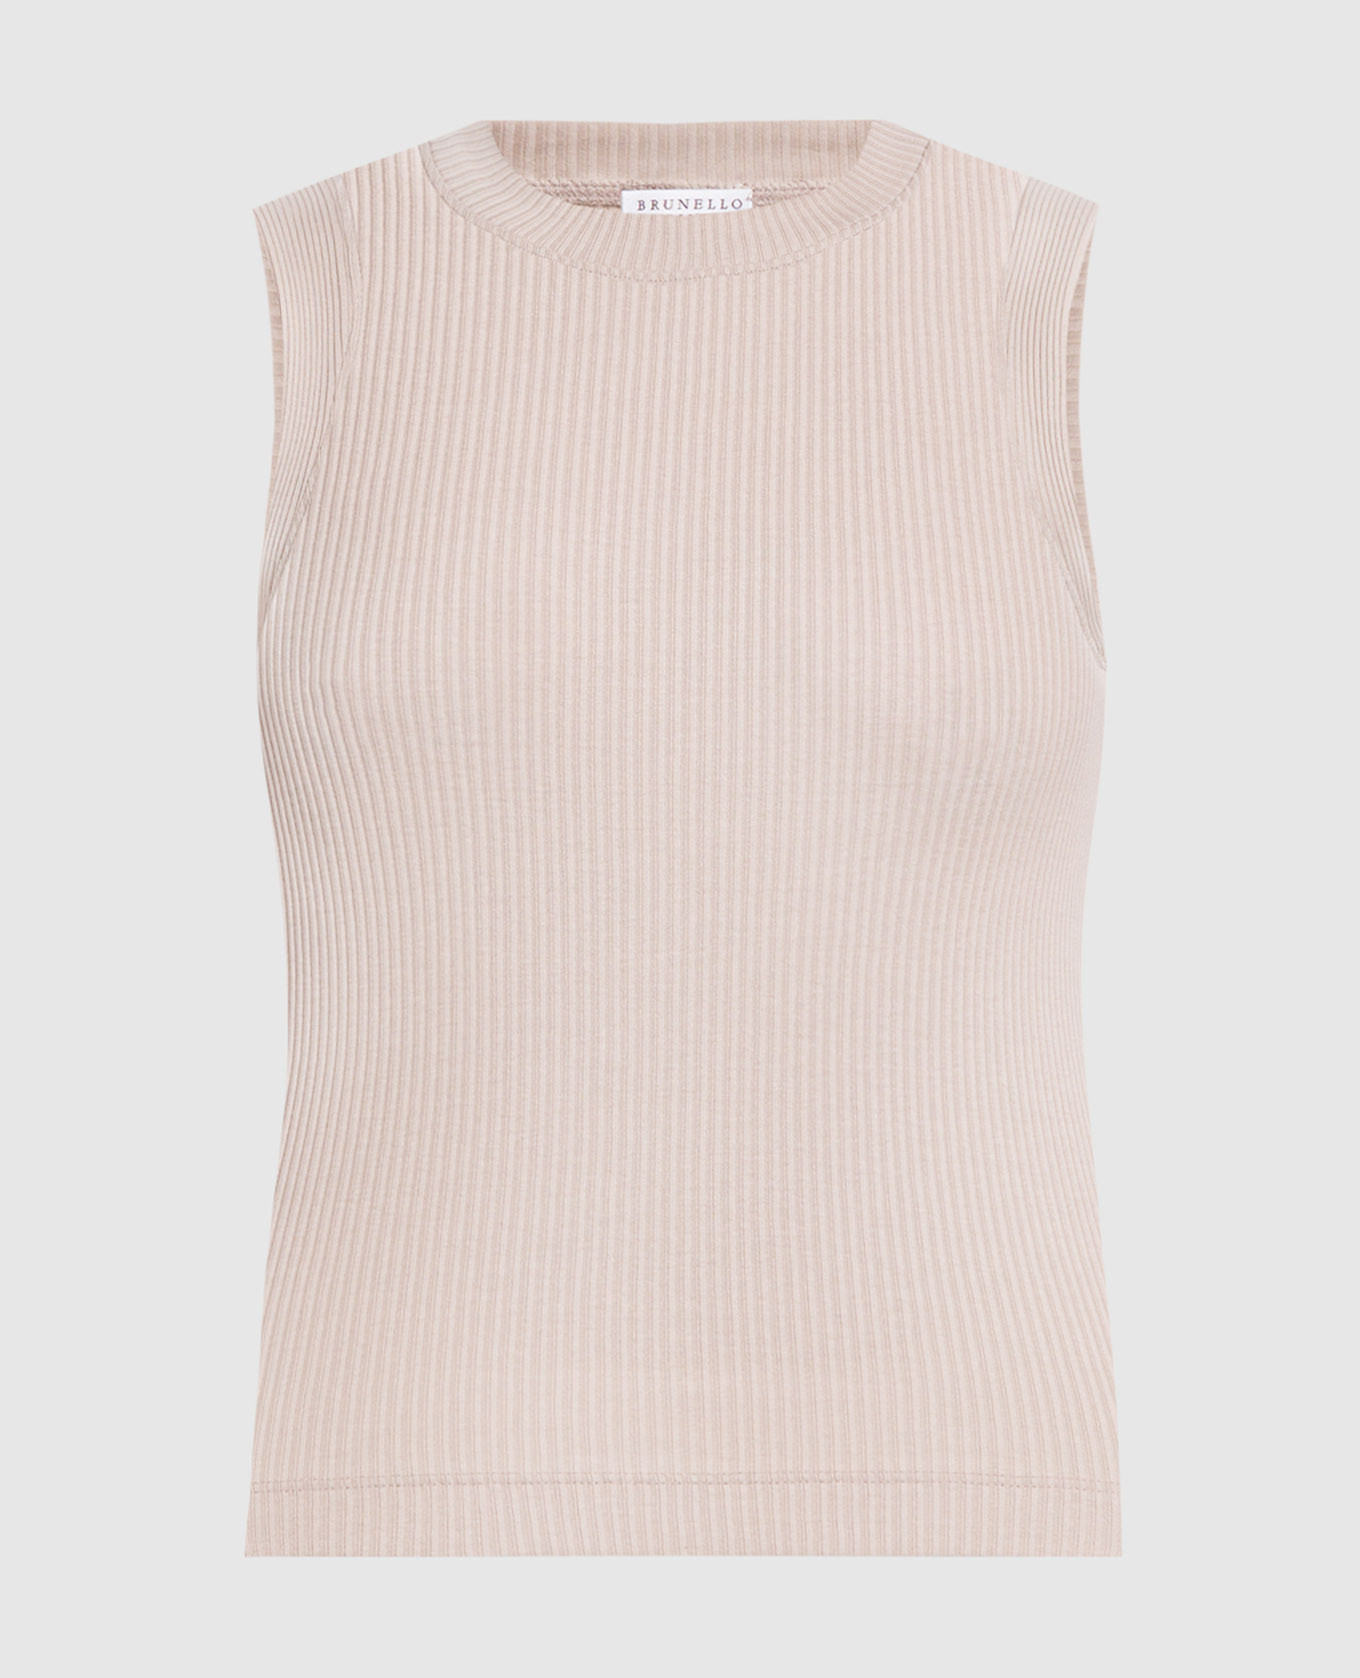 Beige ribbed top with monil chain